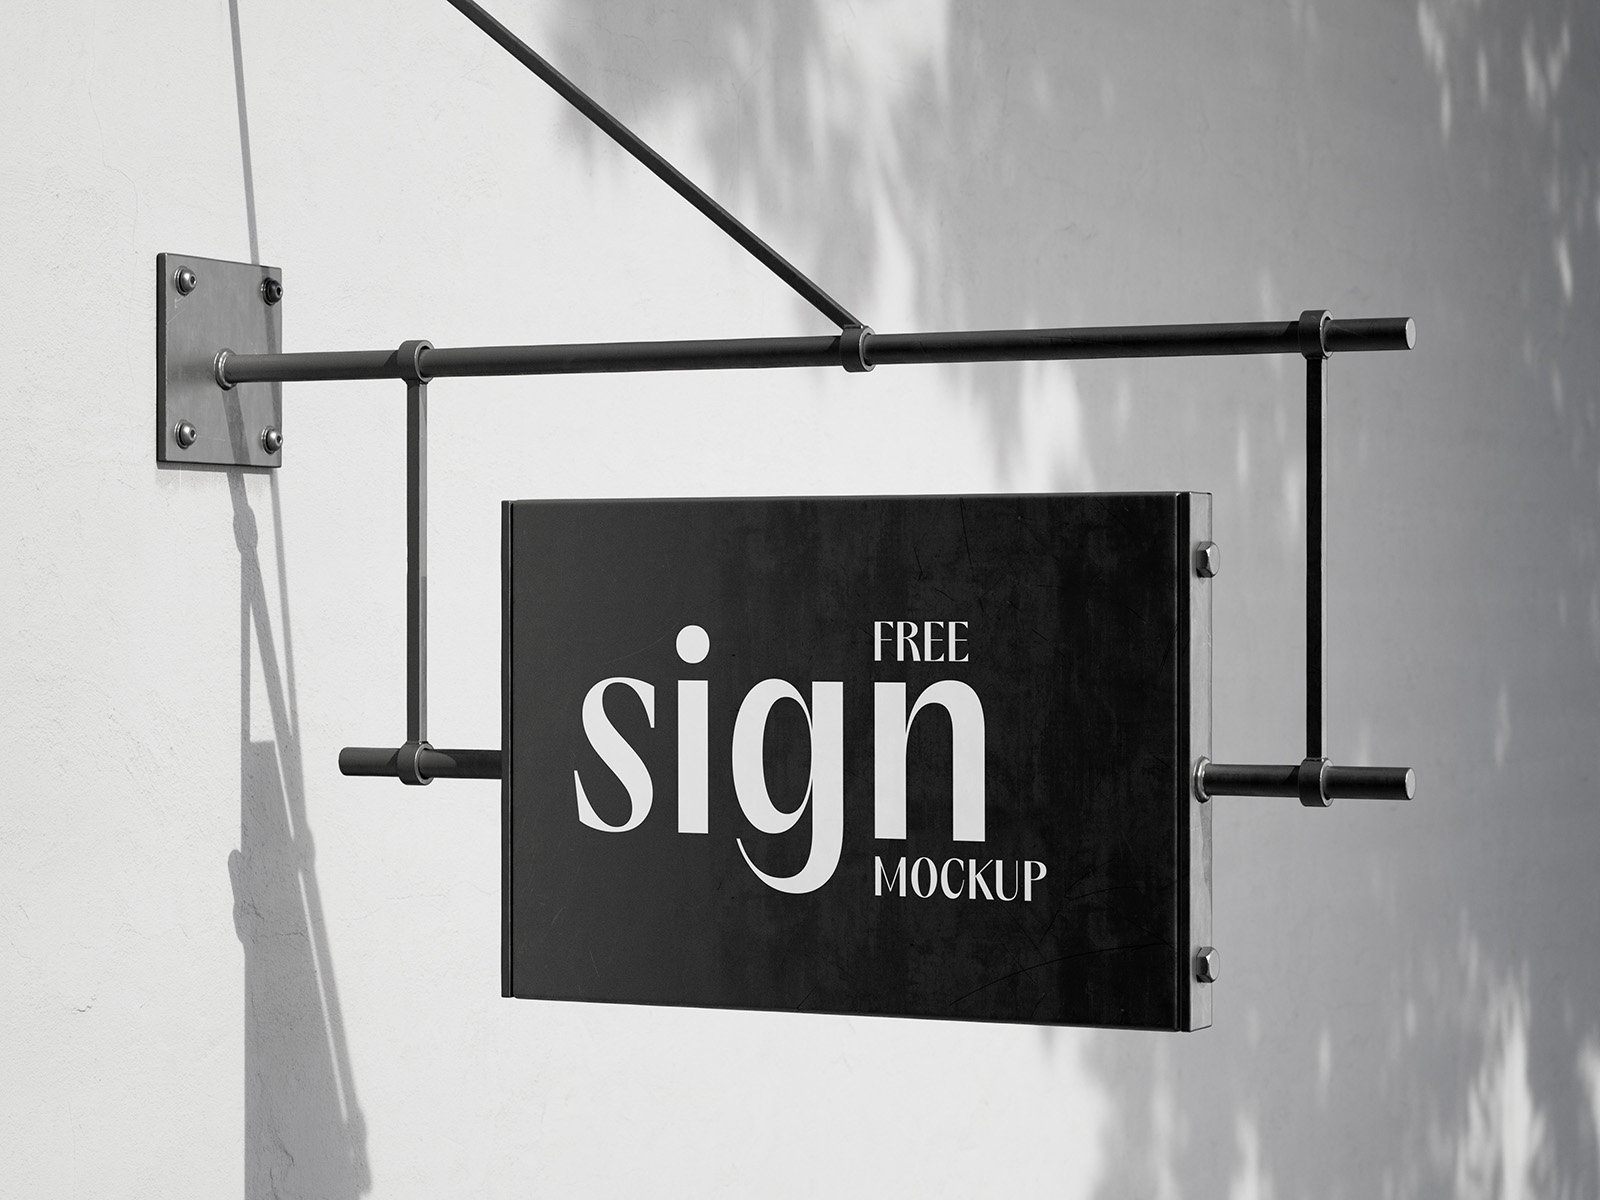 2 Shots of Hanging Sign Mockup on Blank Wall FREE PSD